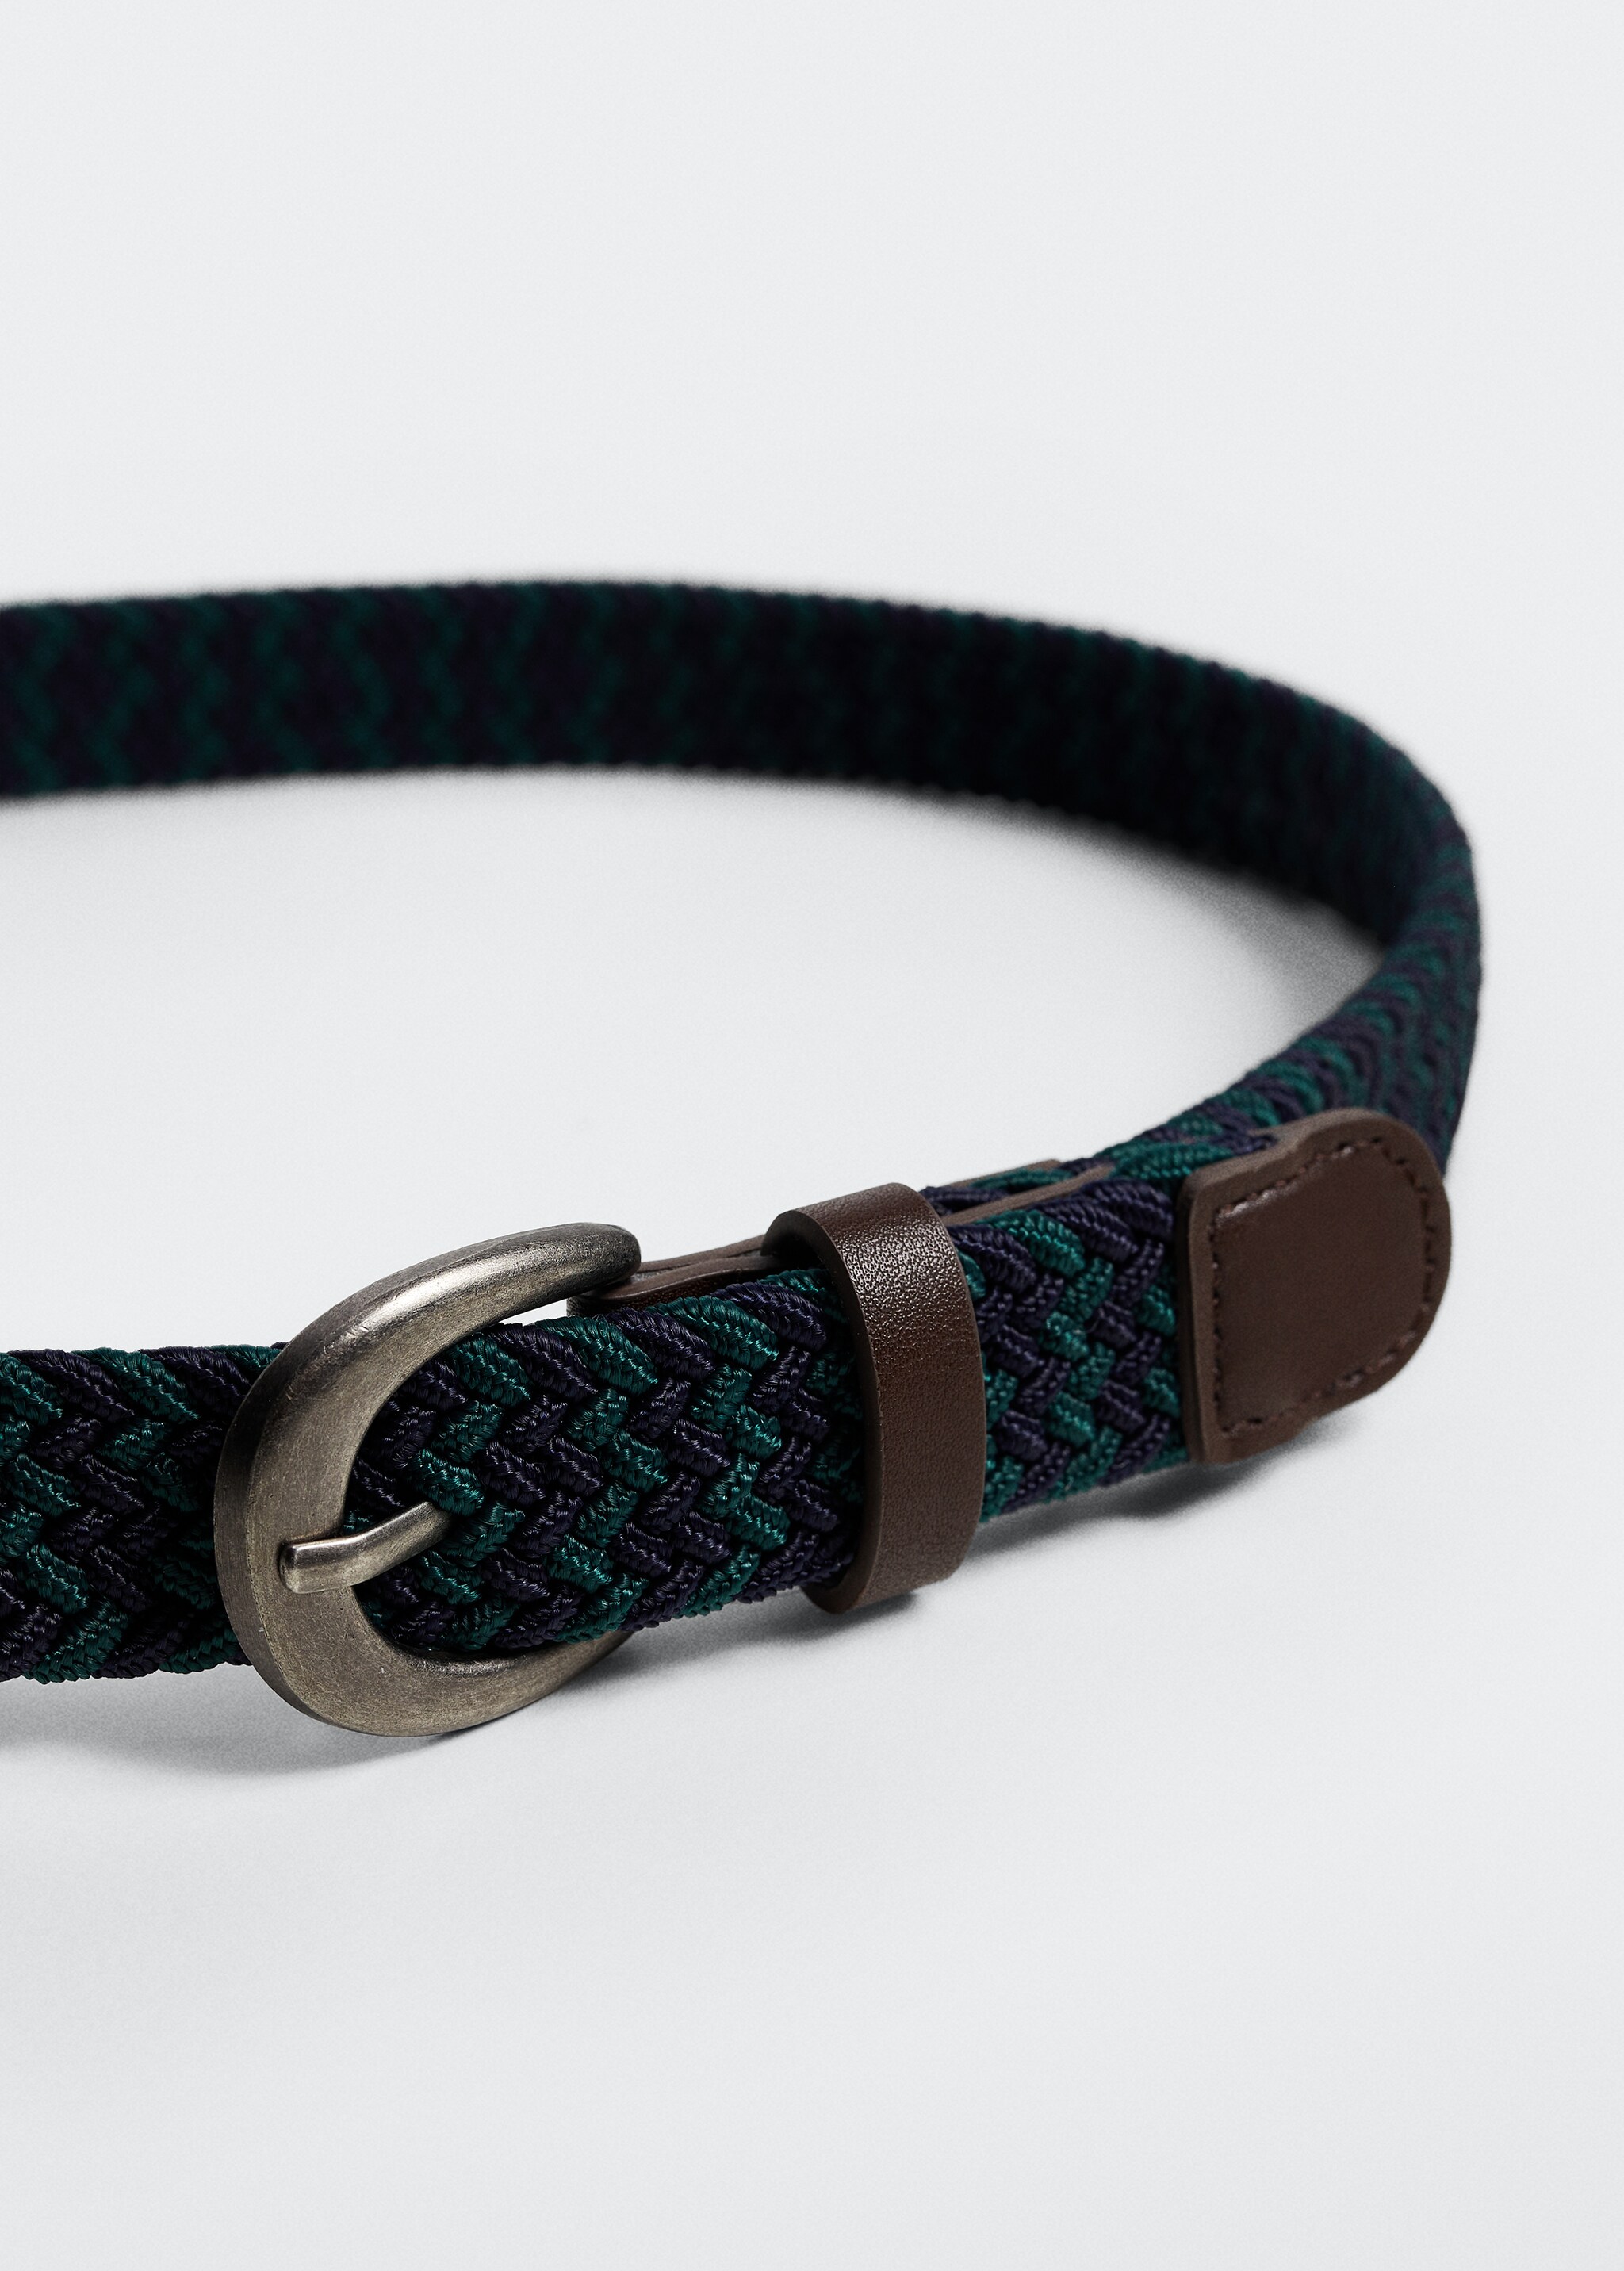 Braided belt - Details of the article 2